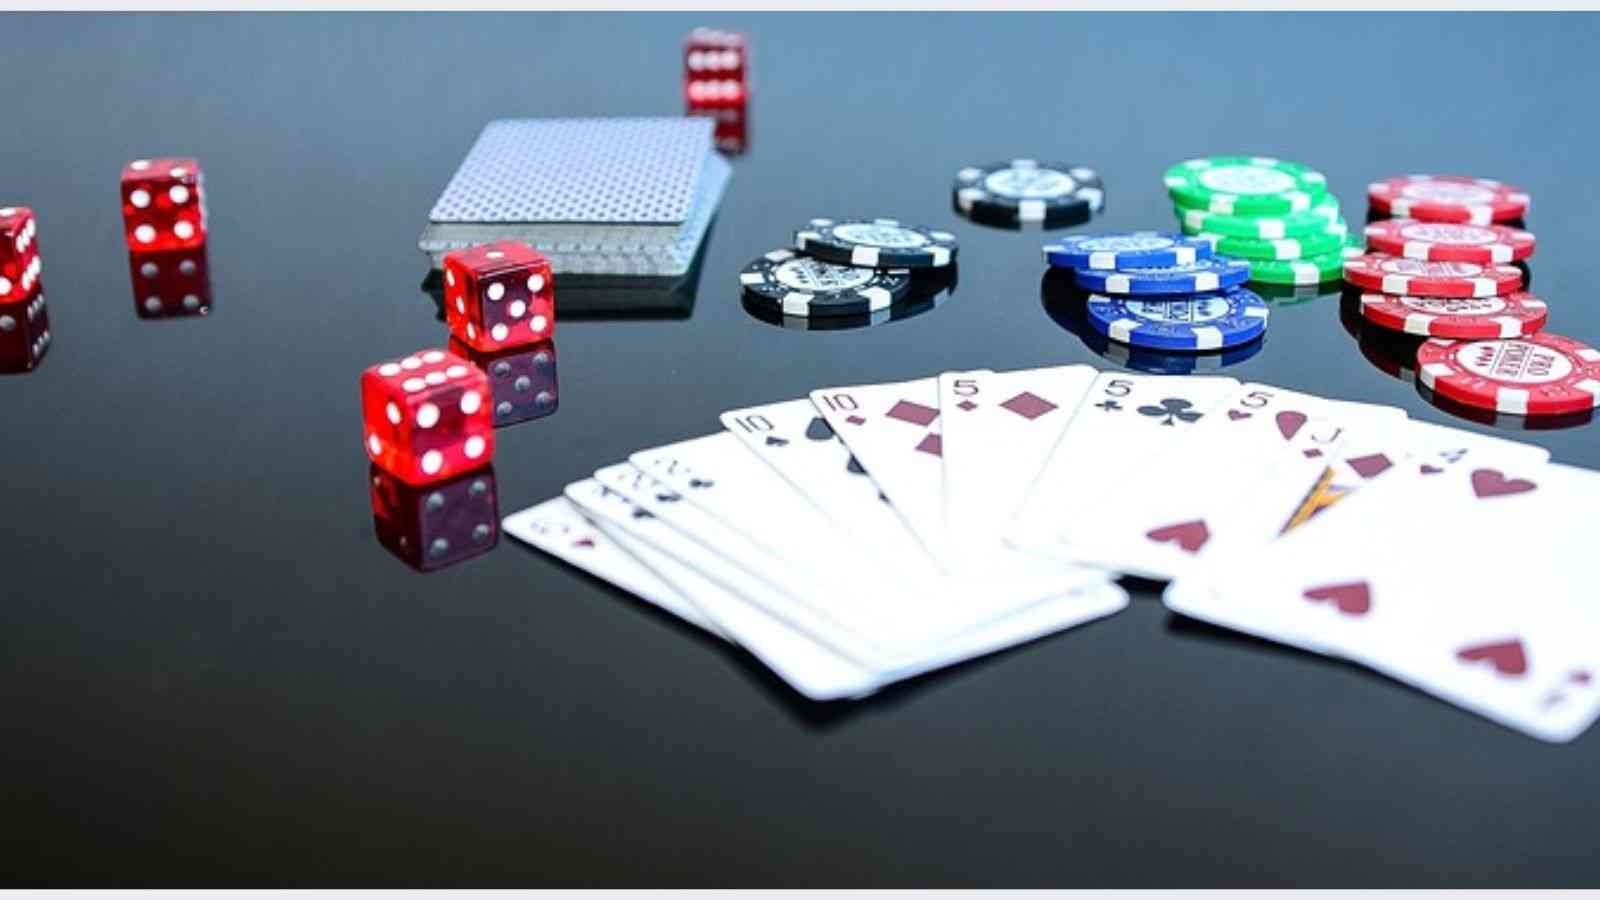 “The Ultimate Jilibet Online Casino Gaming Experience”